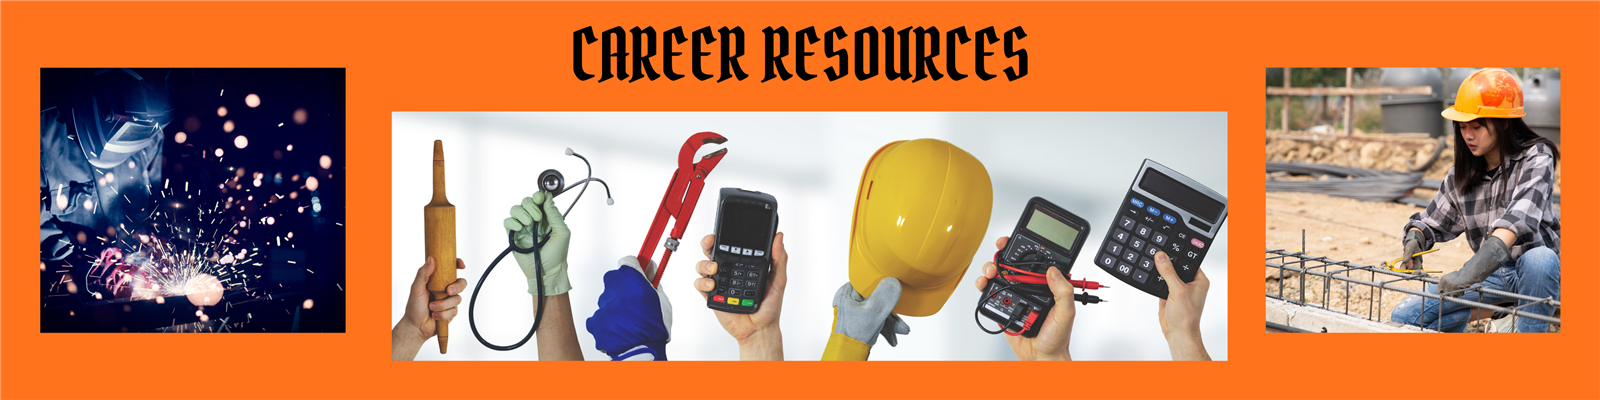 Career Resources Banner 